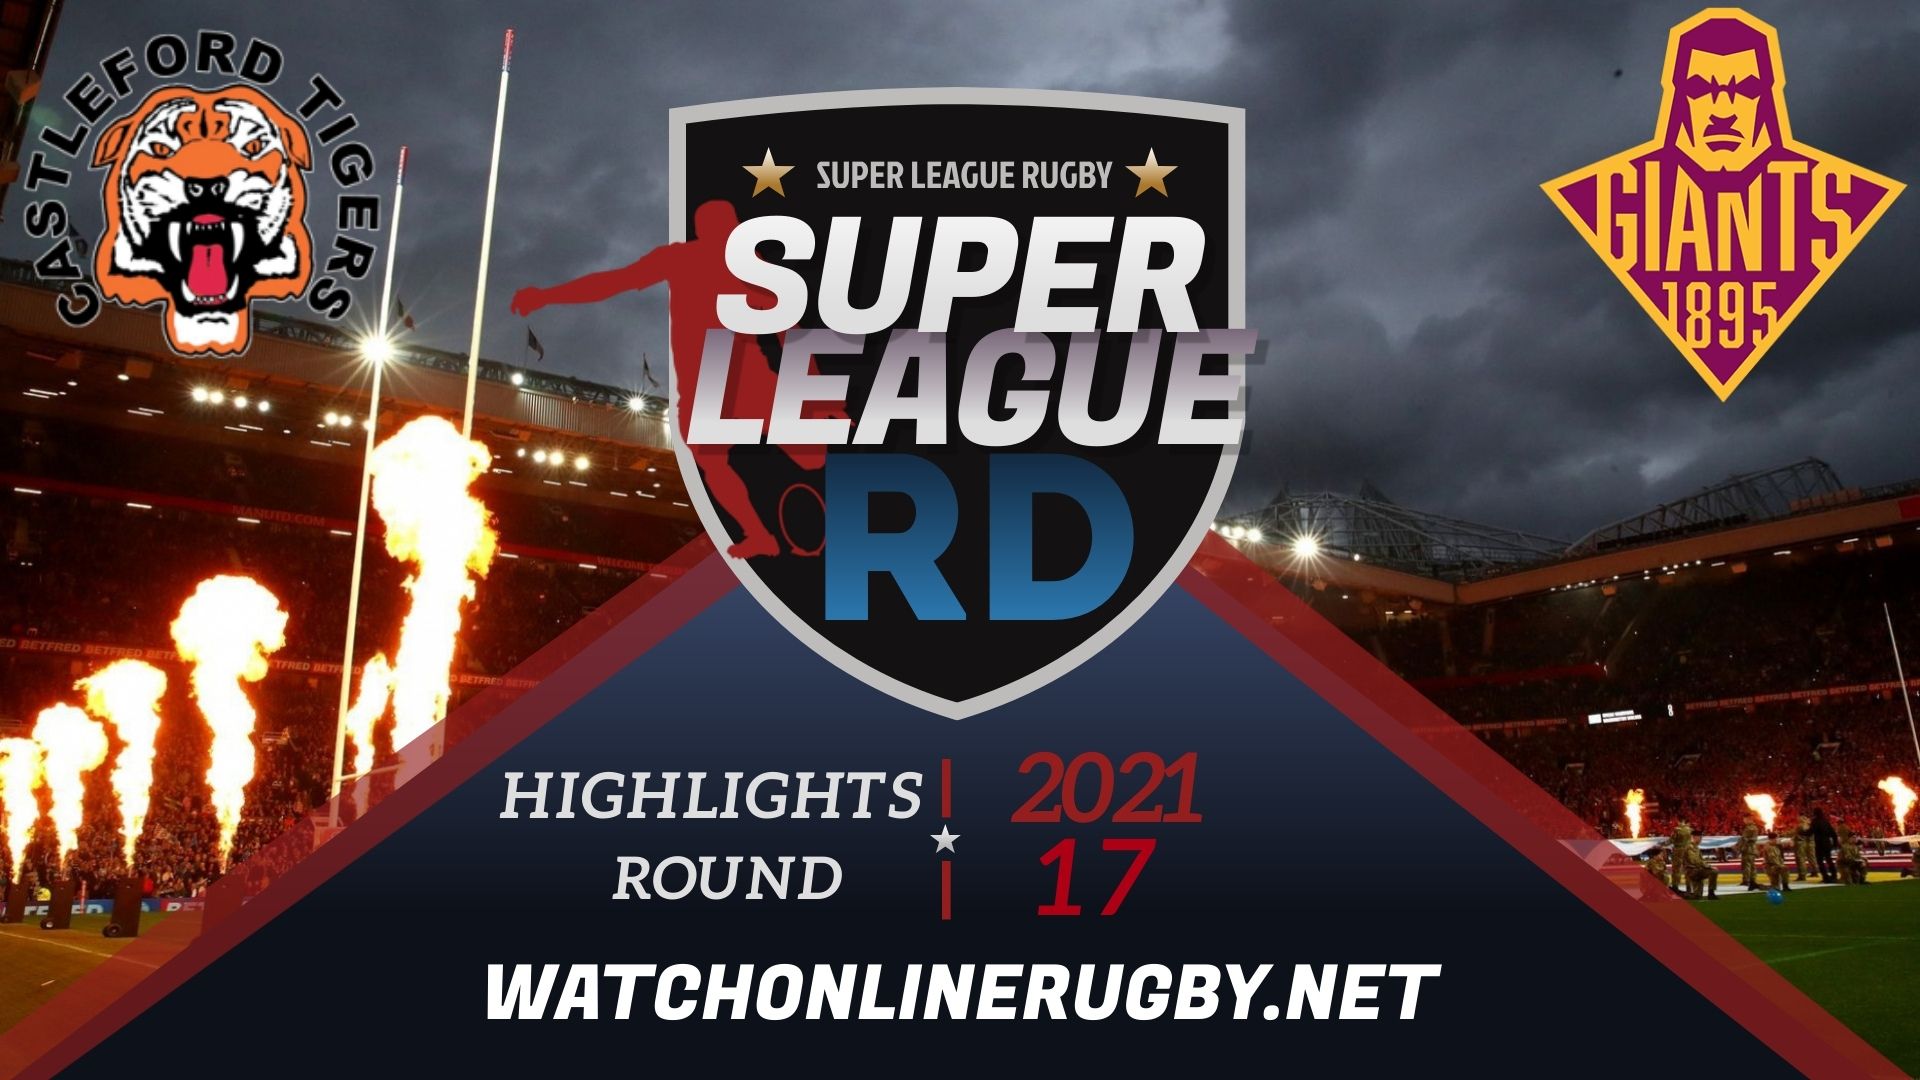 Castleford Tigers Vs Huddersfield Giants Super League Rugby 2021 RD 17